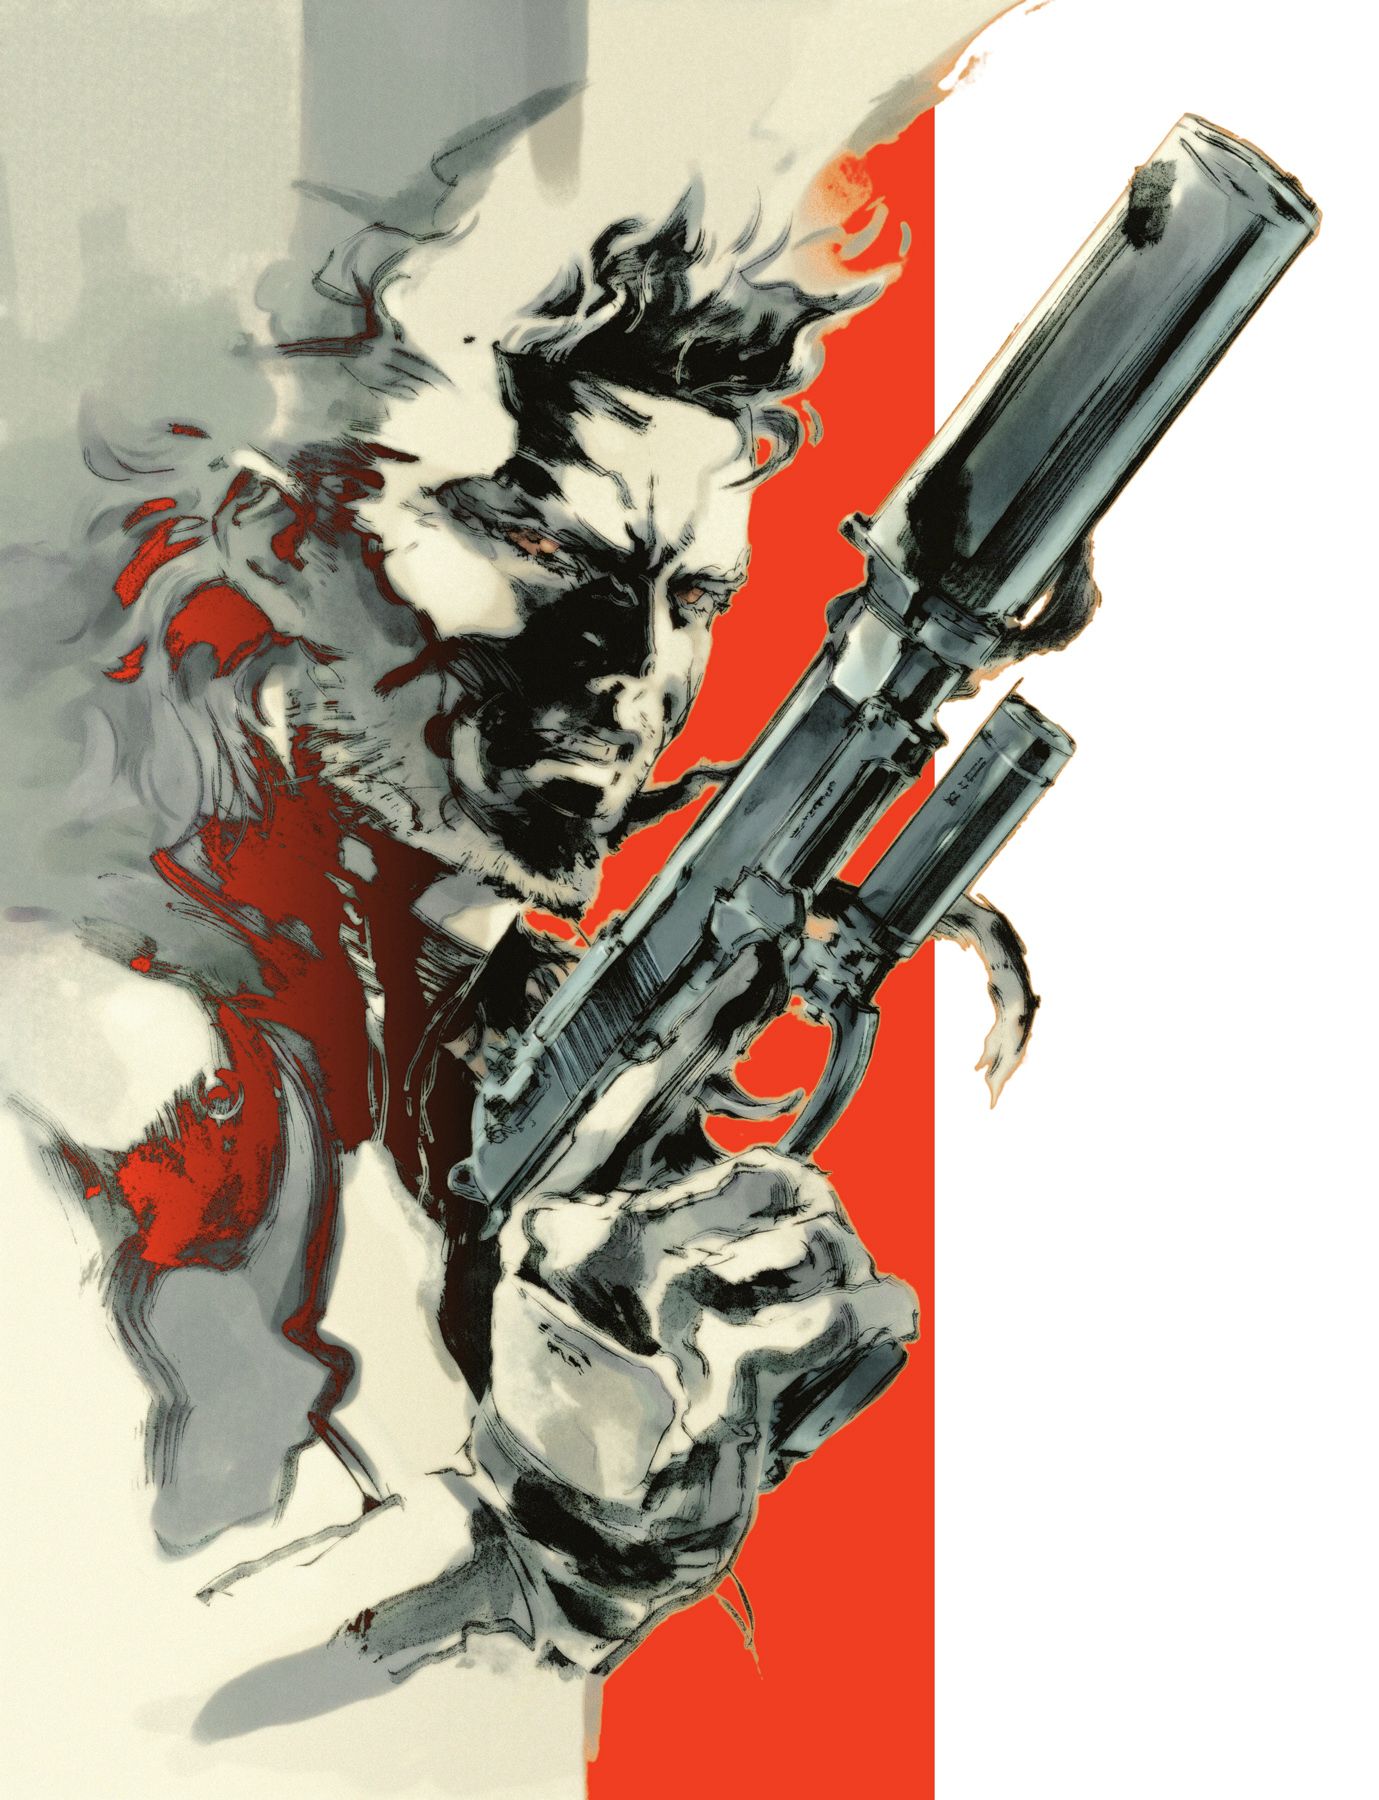 Dark Horse publishing The Art of Metal Gear Solid I-IV collecting